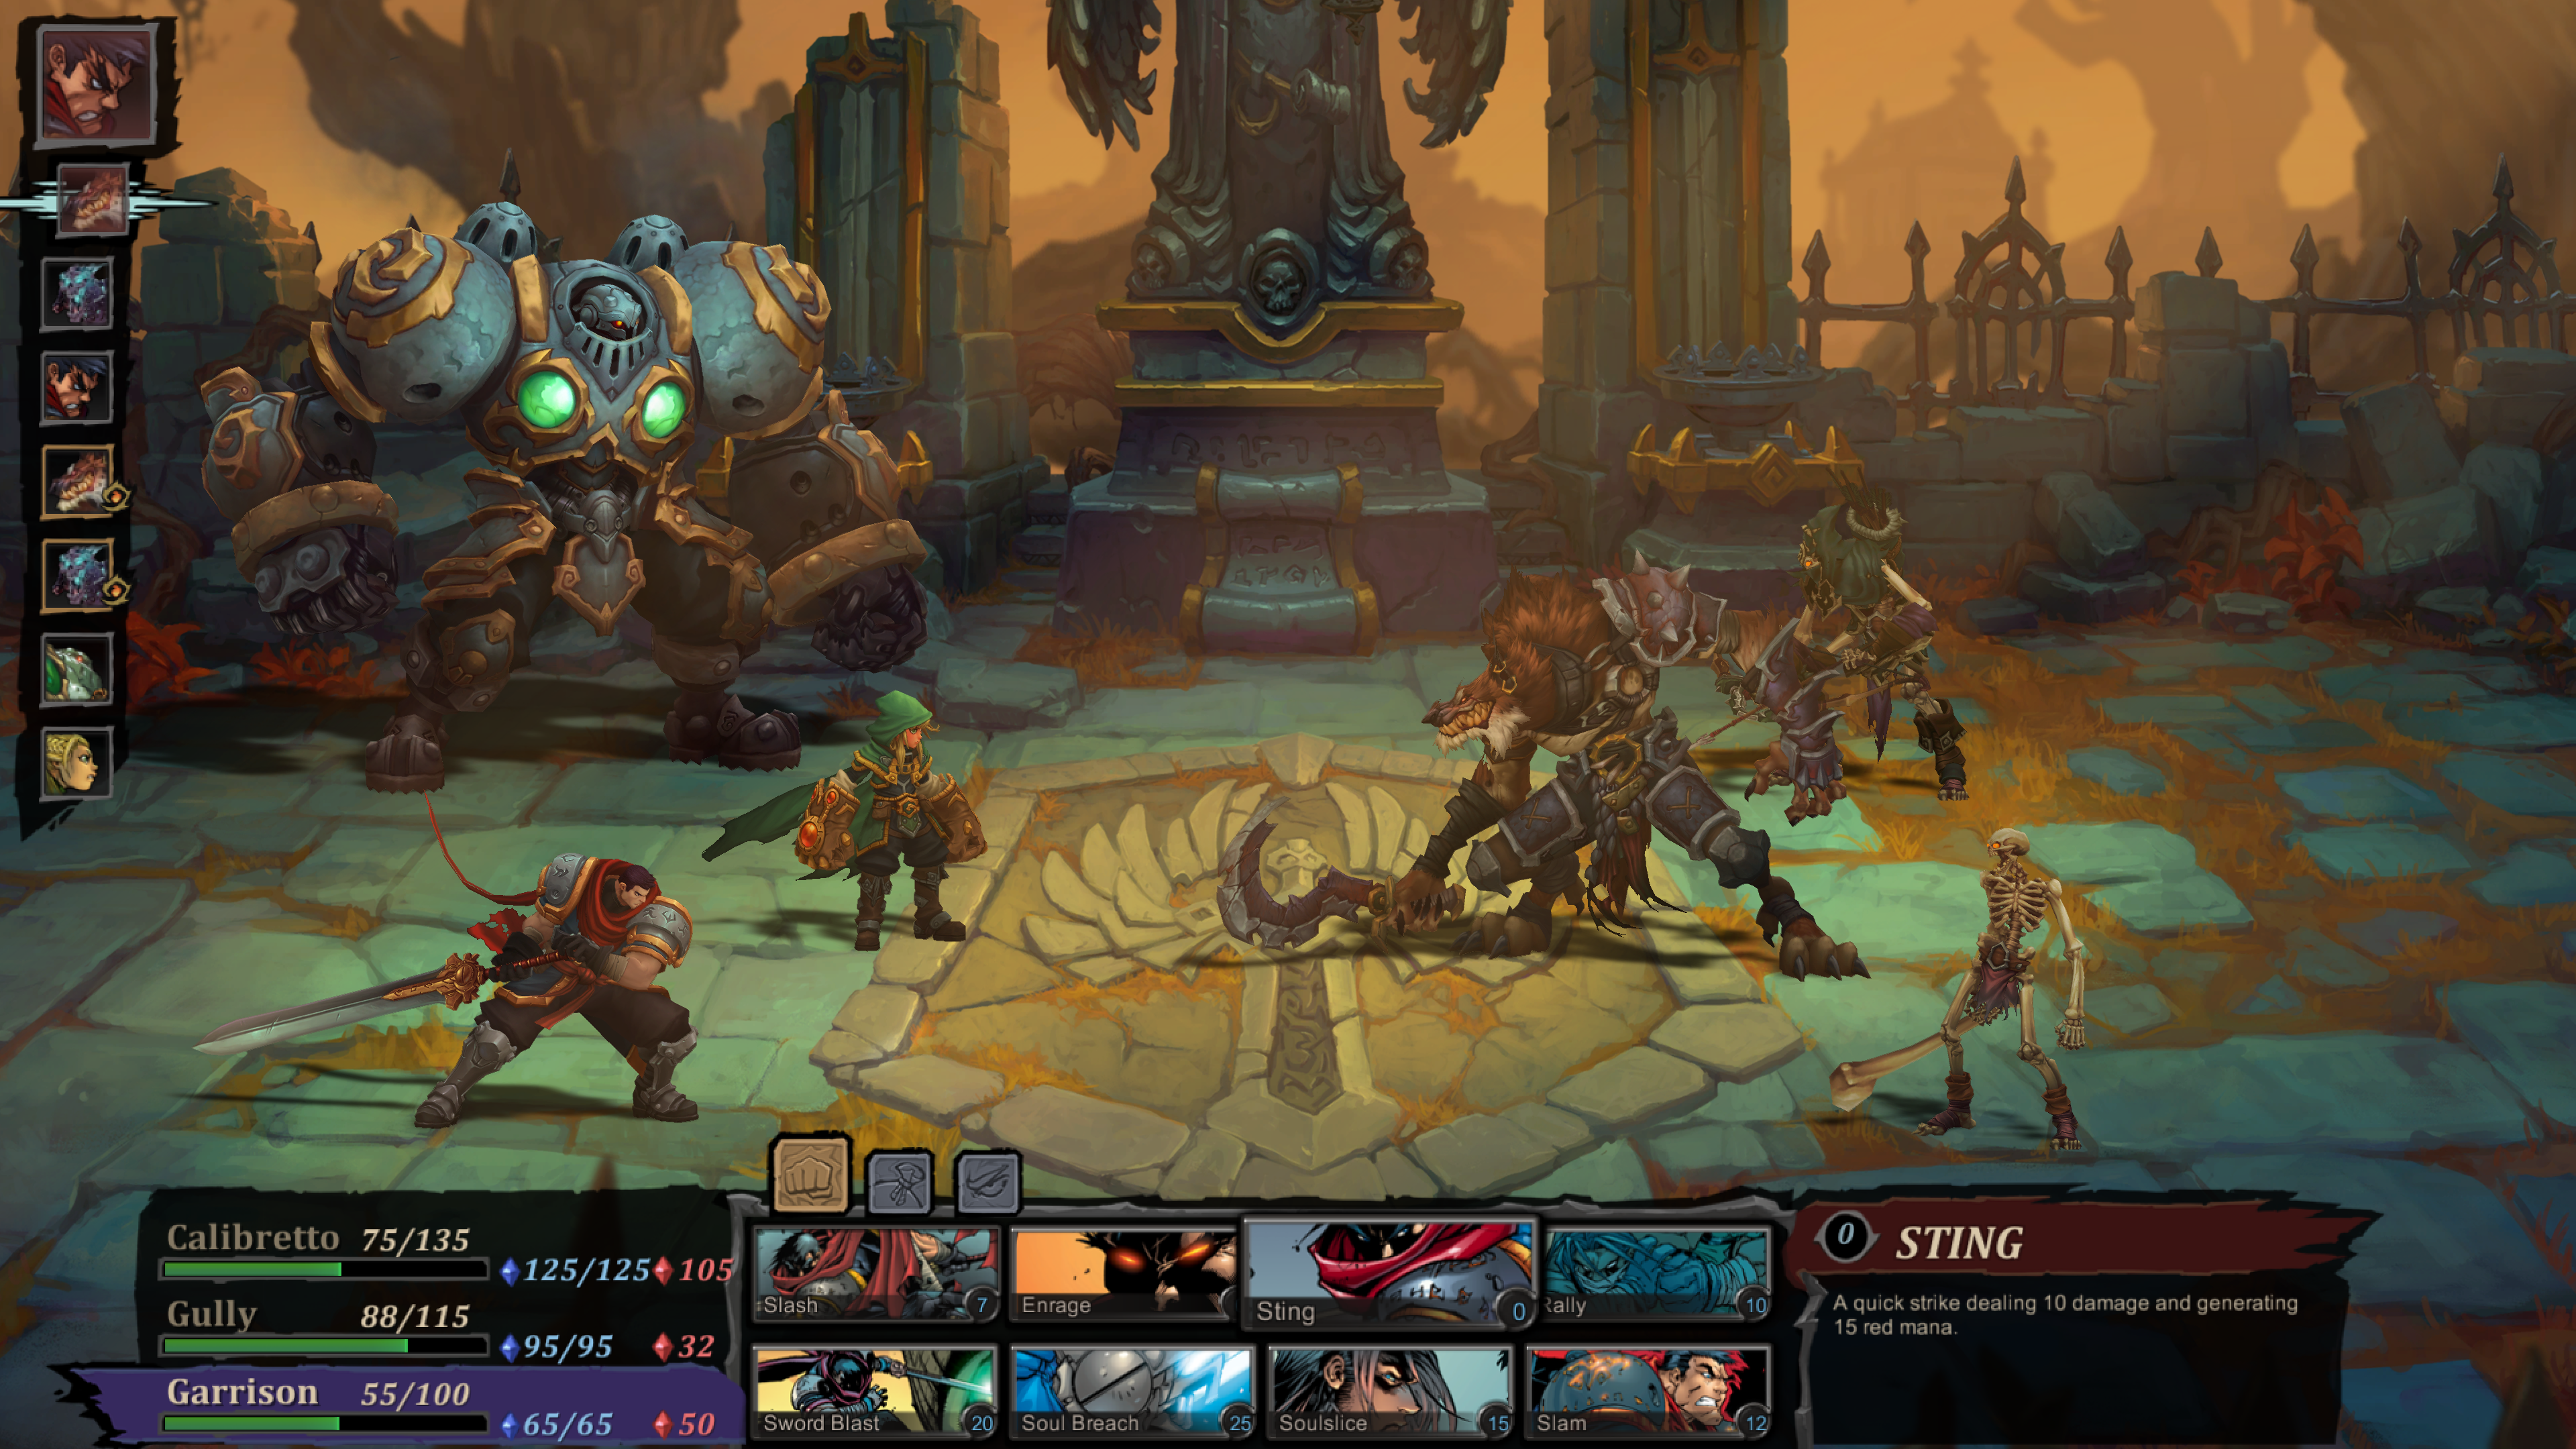 3840x2160 > Battle Chasers Wallpapers